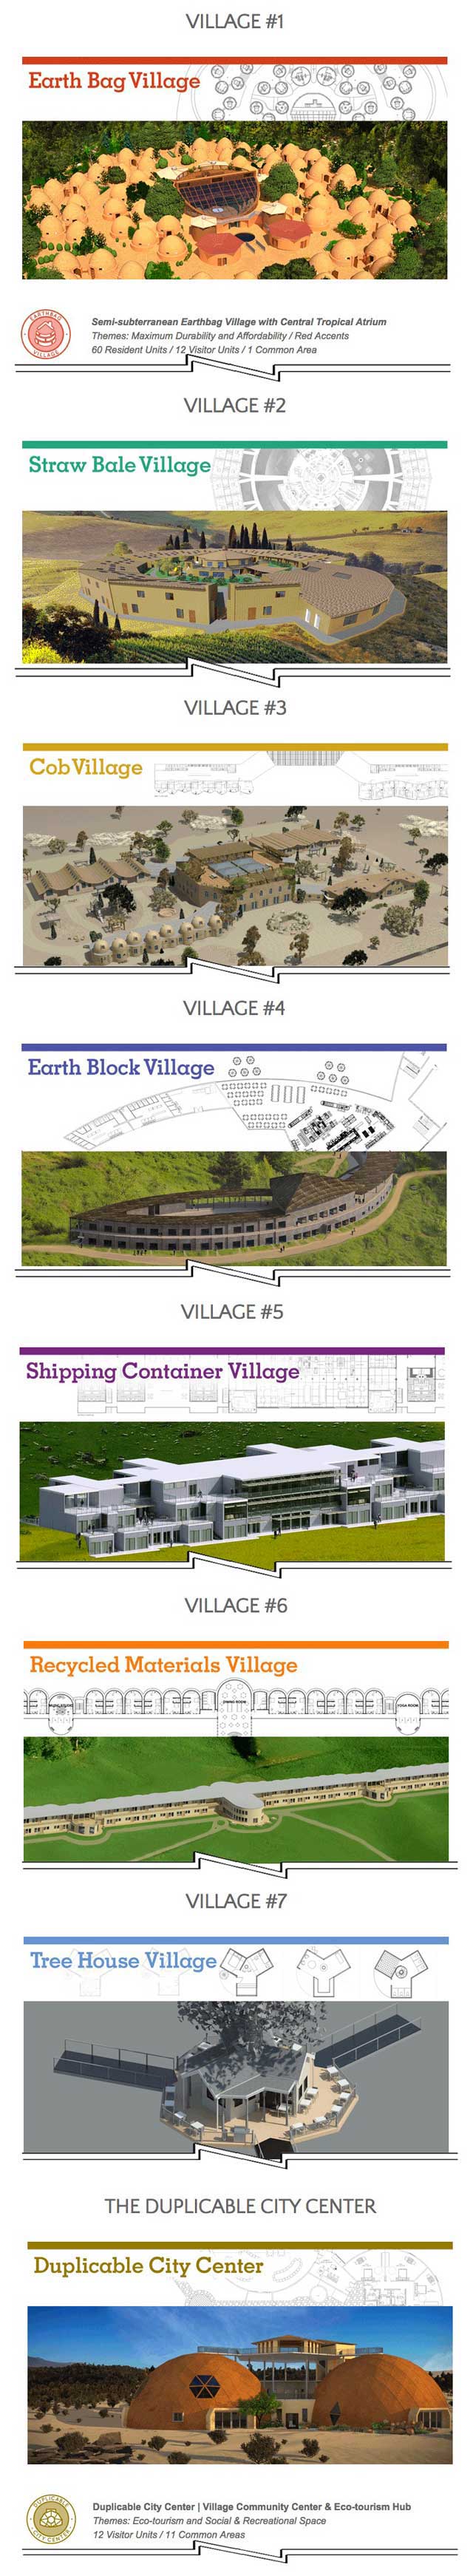 This last week the core team updated all the images on Highest Good Housing page and all the individual village headers. What you see here is the updated Highest Good Housing page with the new images. The updated individual village pages have similar new header images and identical social media images.